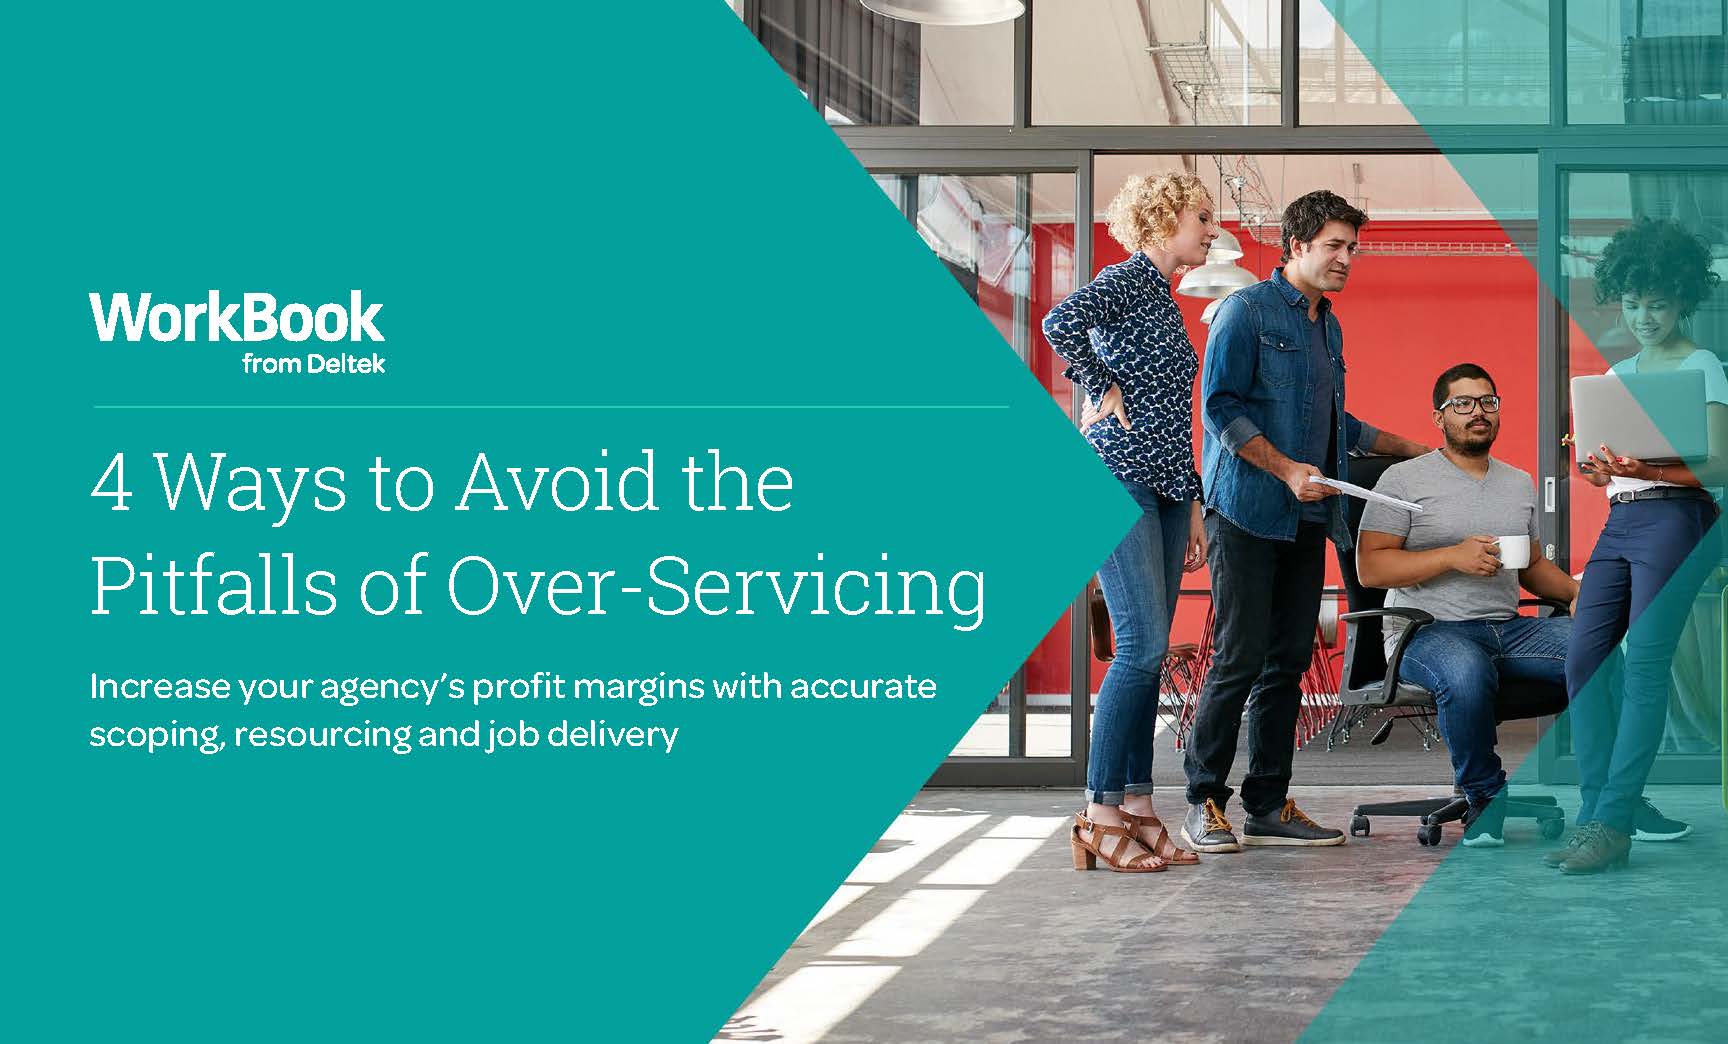 4 Ways to Avoid the Pitfalls of Over-Servicing